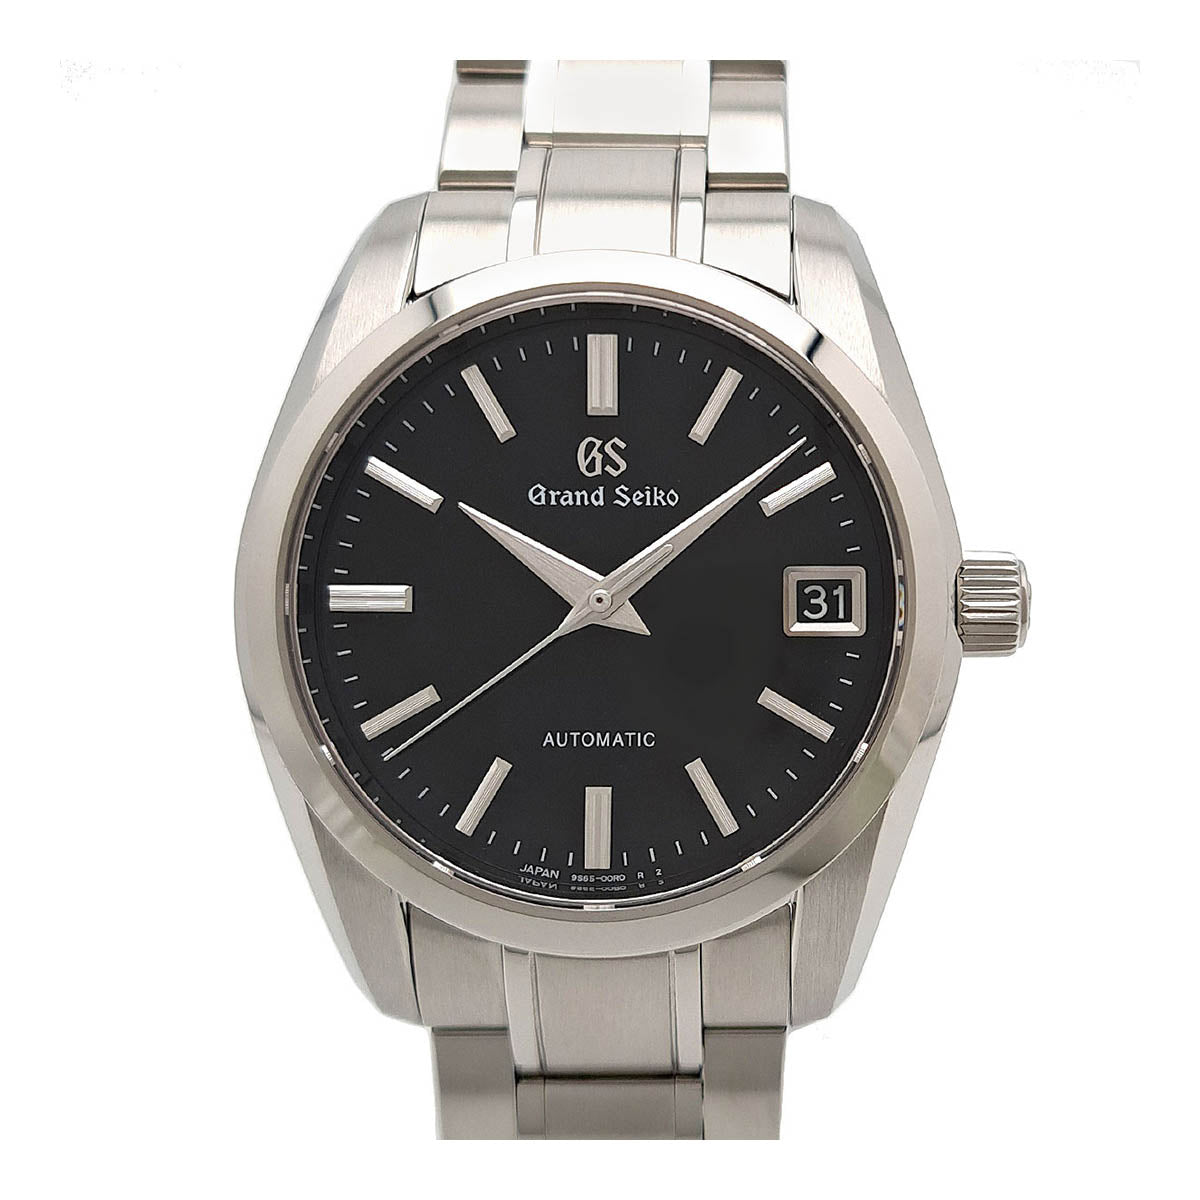 Seiko Grand Seiko Mechanical SBGR253 Automatic Watch, Stainless Steel, Men's (Pre-owned) SBGR253